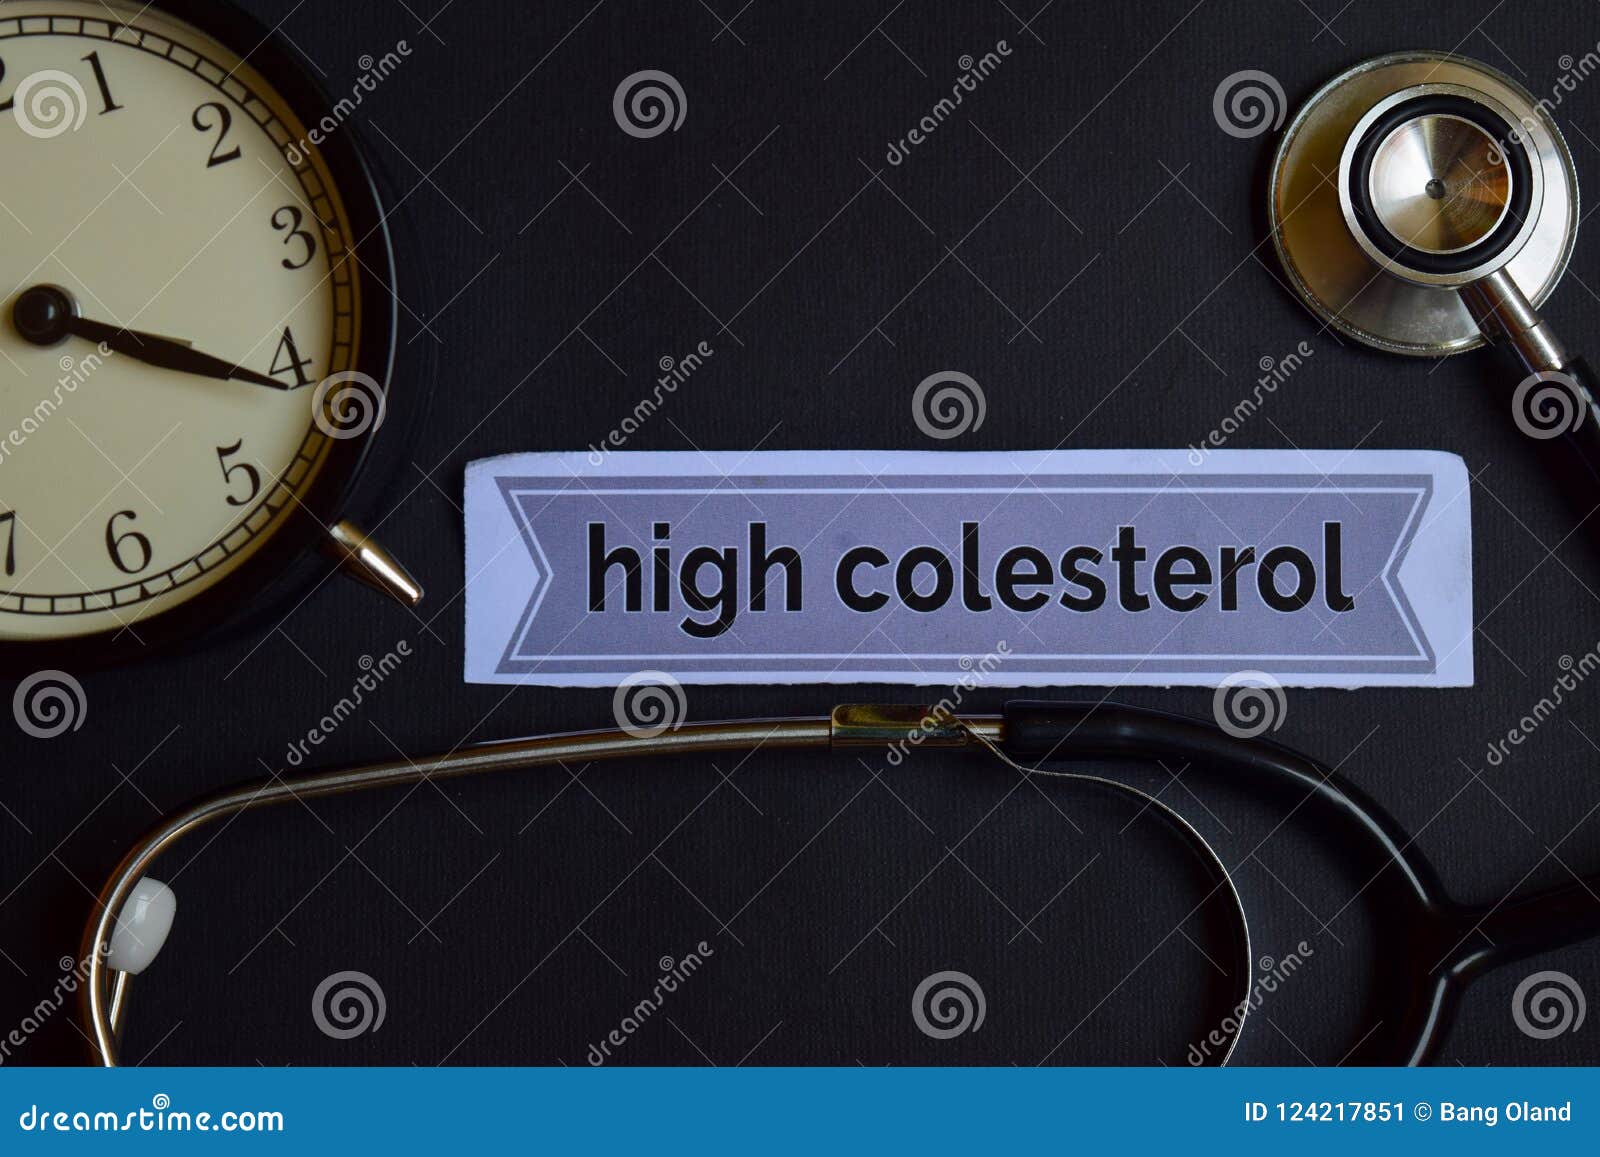 high colesterol on the print paper with healthcare concept inspiration. alarm clock, black stethoscope.